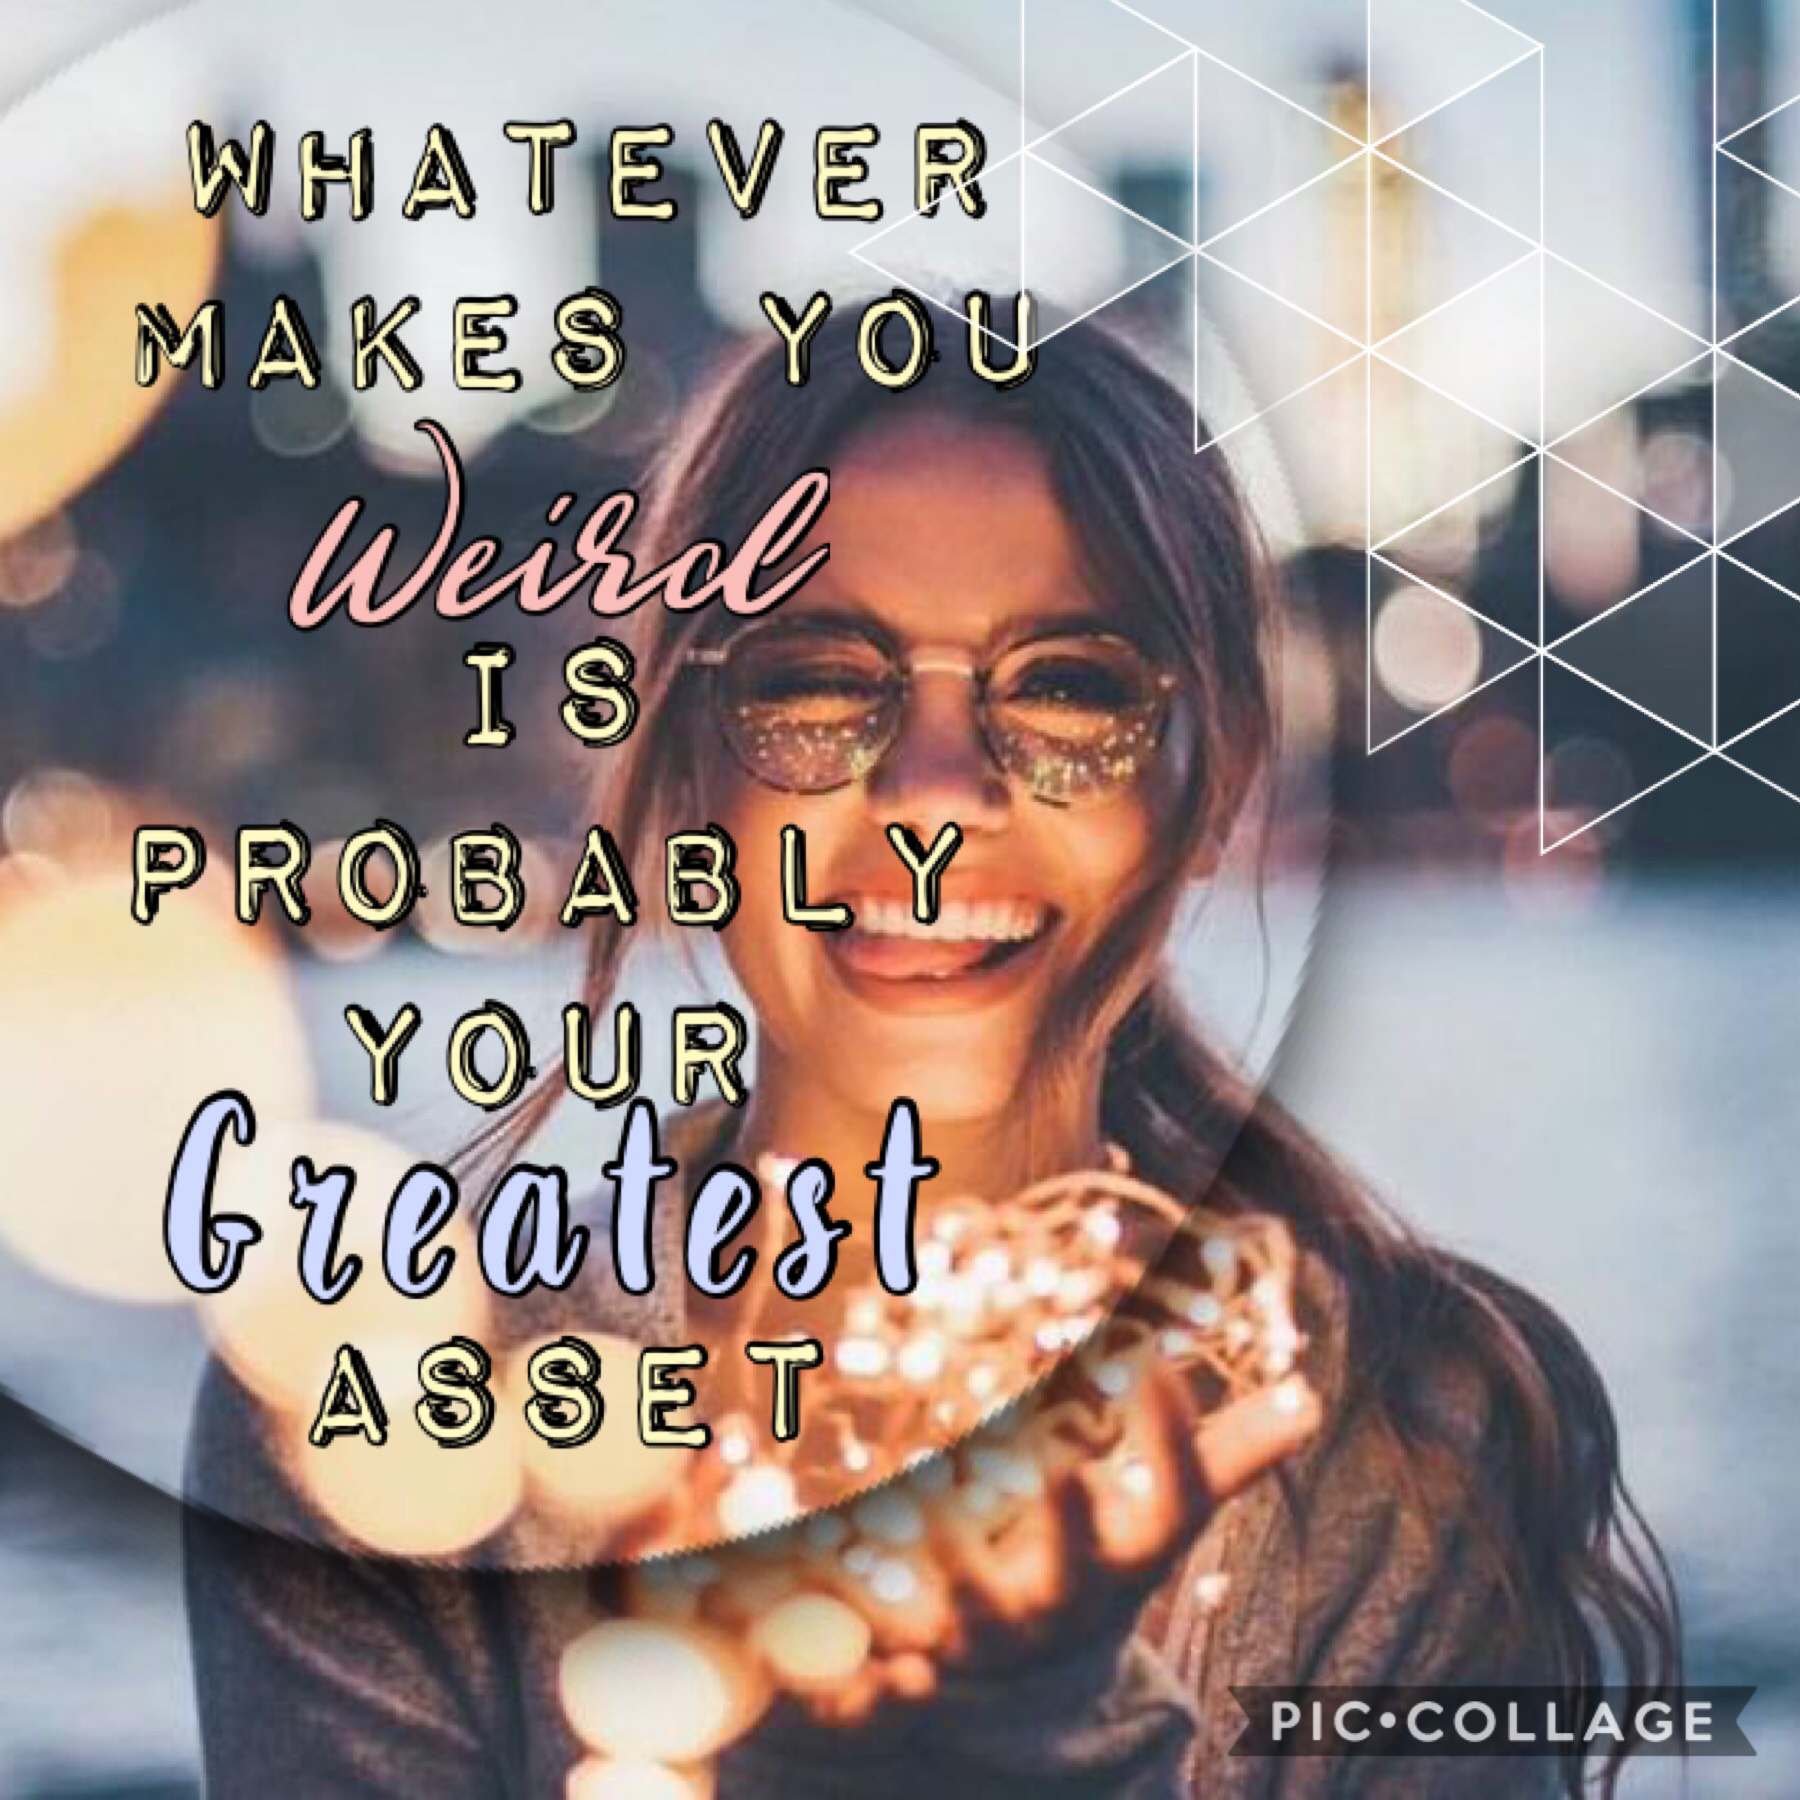 Whatever makes you weird is probably you’re greatest asset